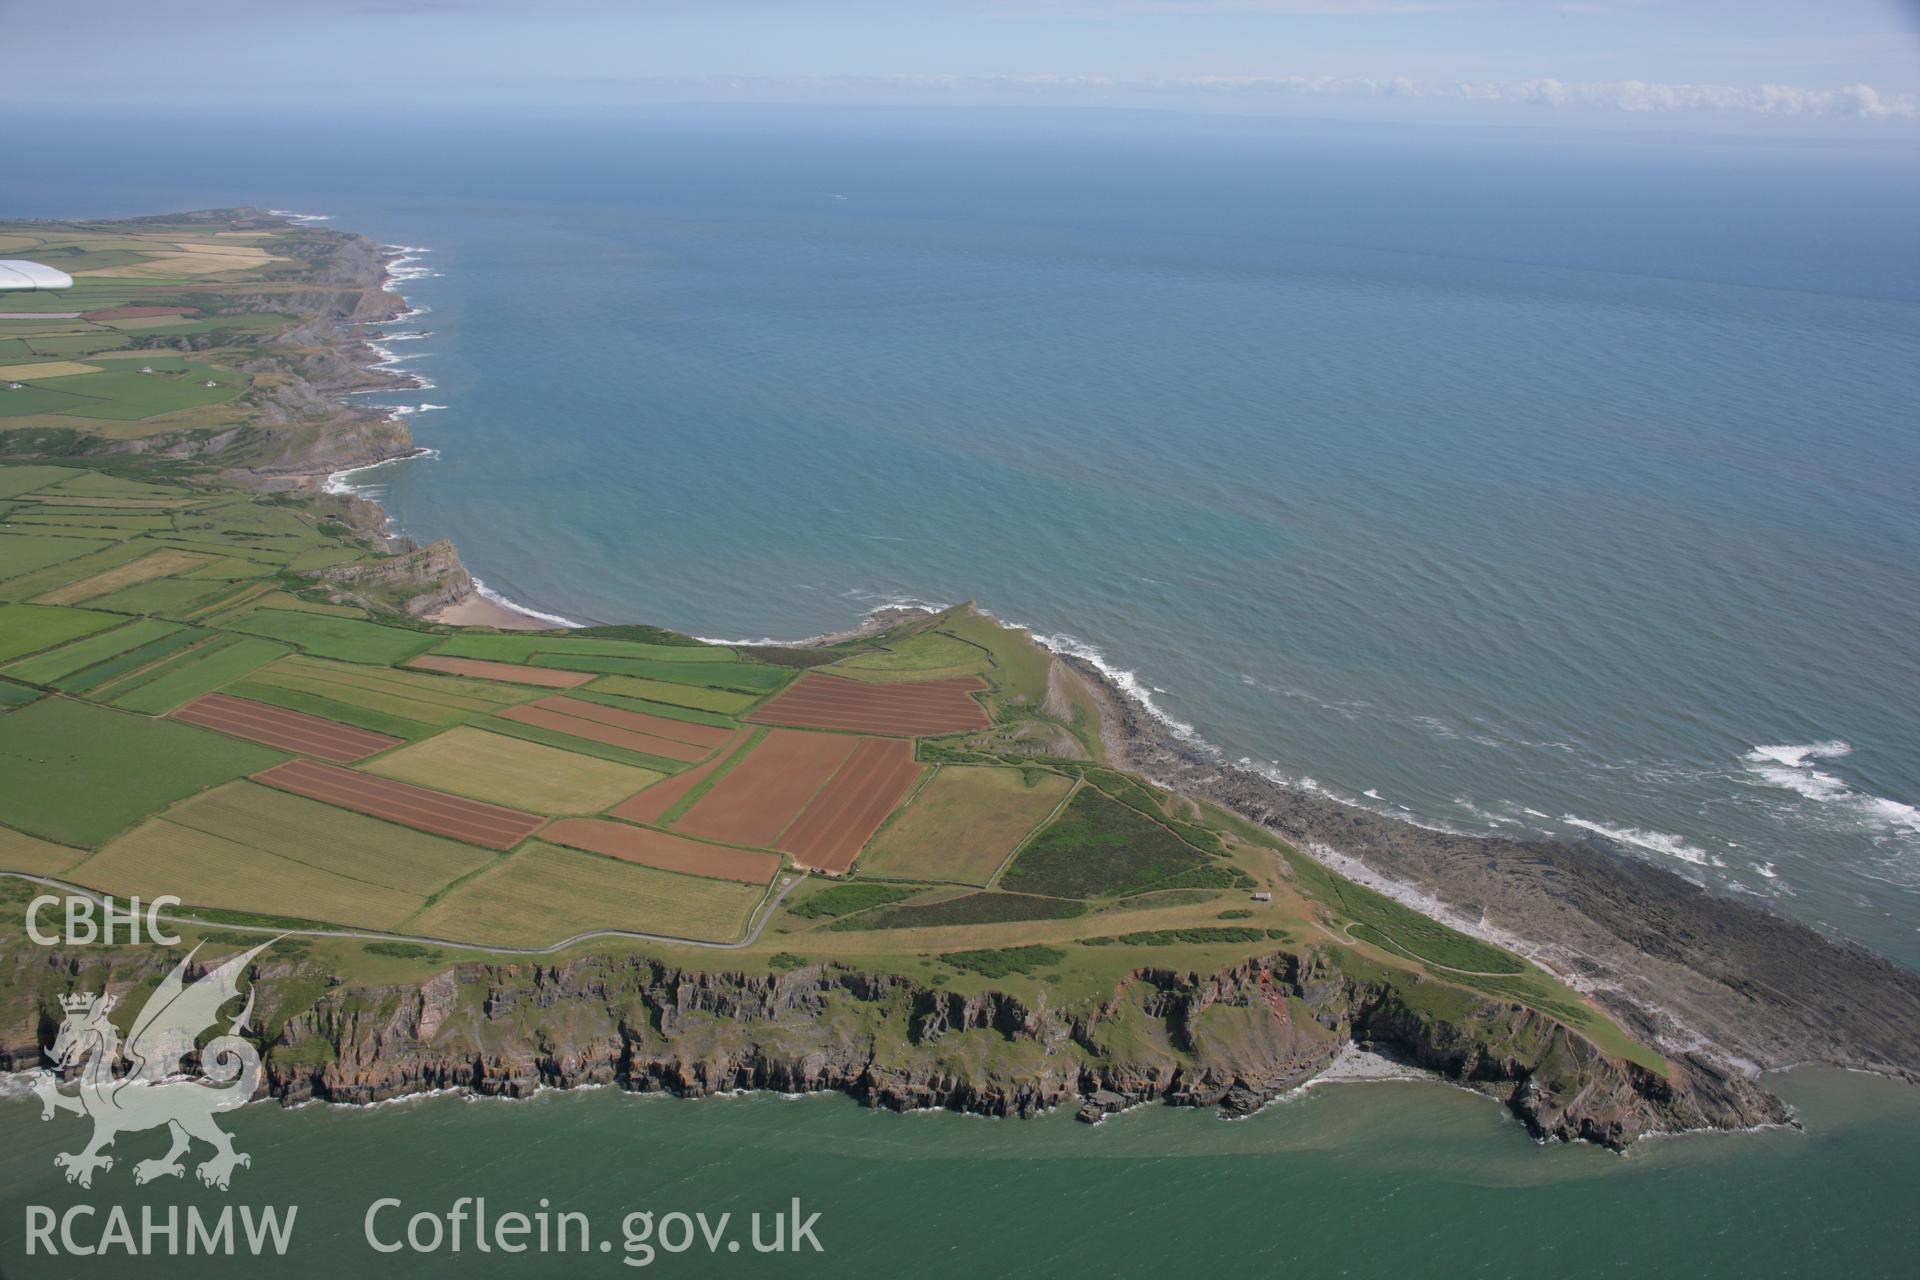 RCAHMW colour oblique aerial photograph of Rhossili Field System (The Vile). Taken on 11 July 2006 by Toby Driver.